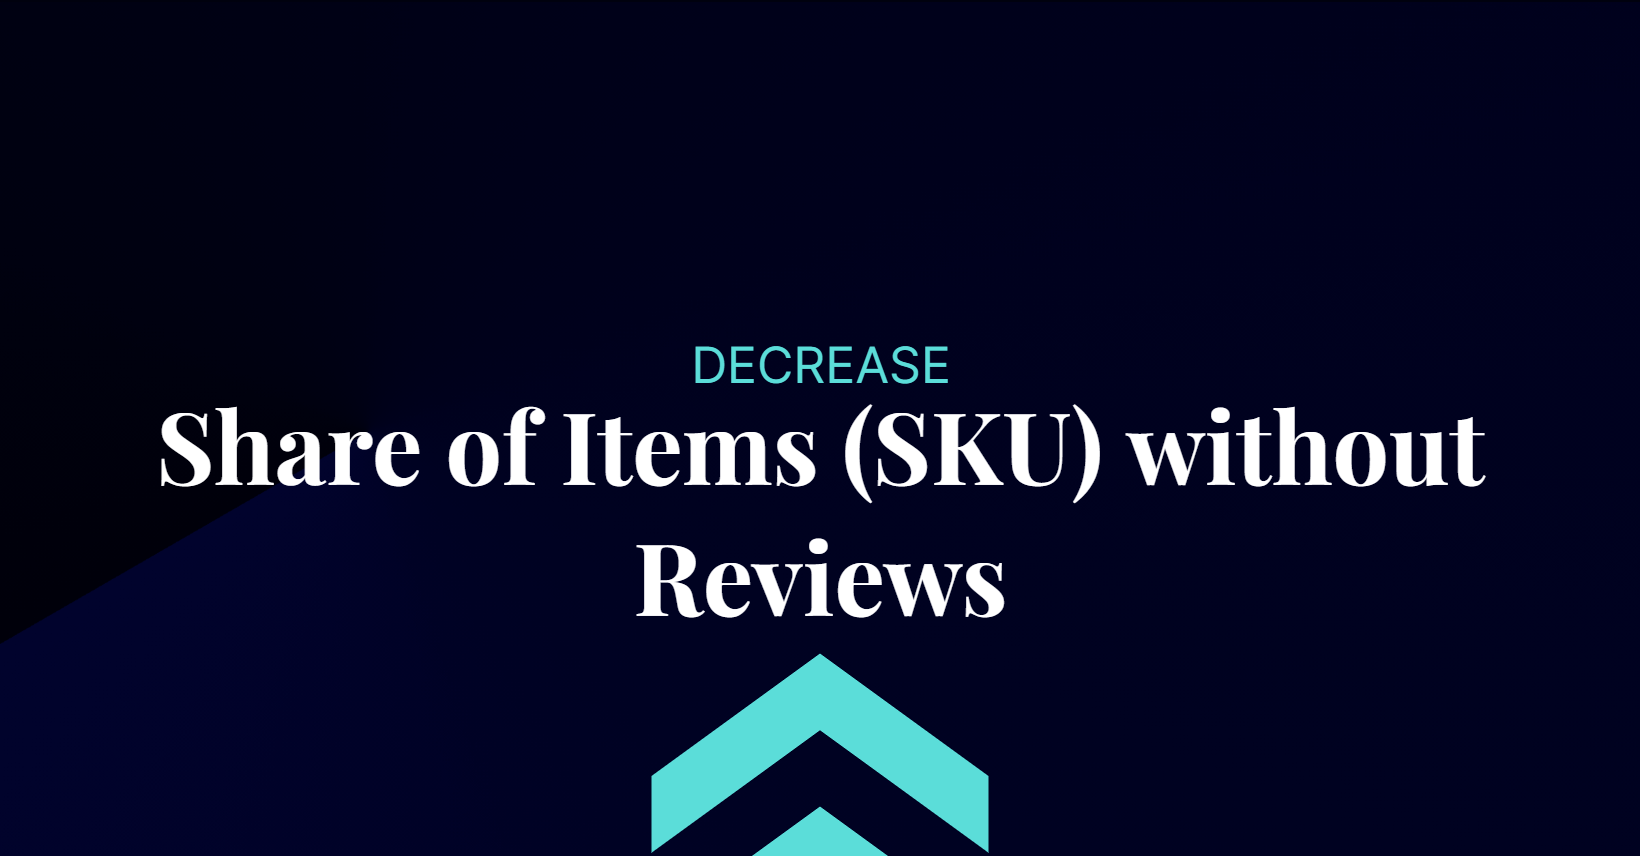 Address Share of SKUs without Reviews | Futurmax